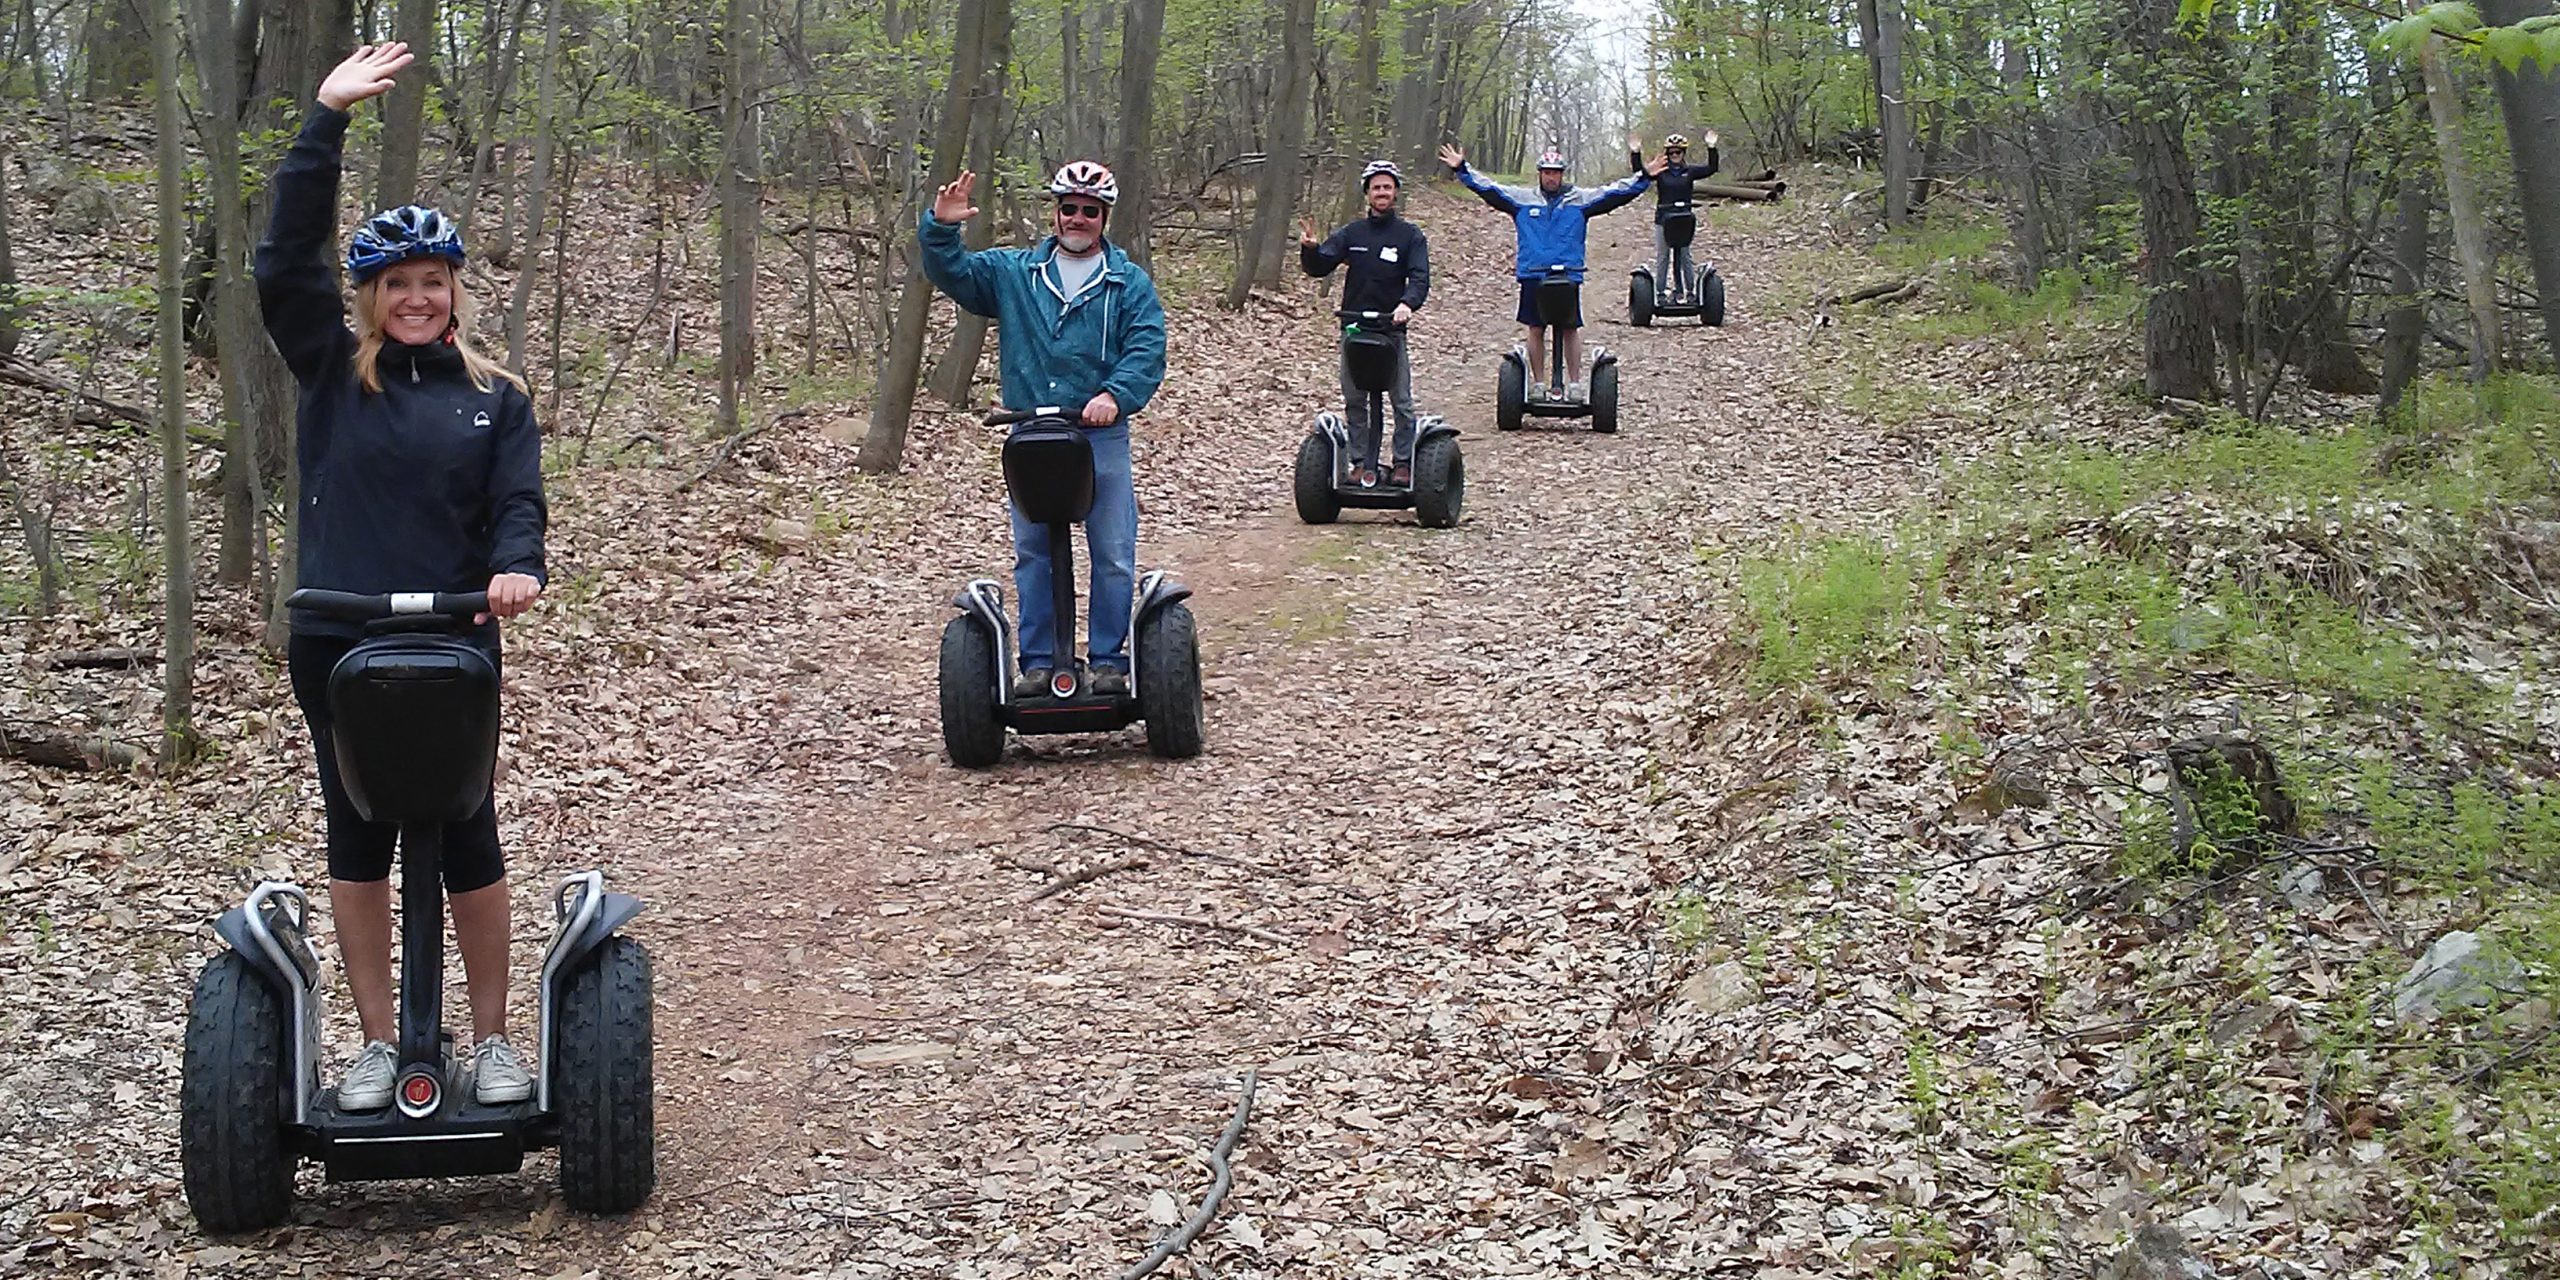 people on a segway tour